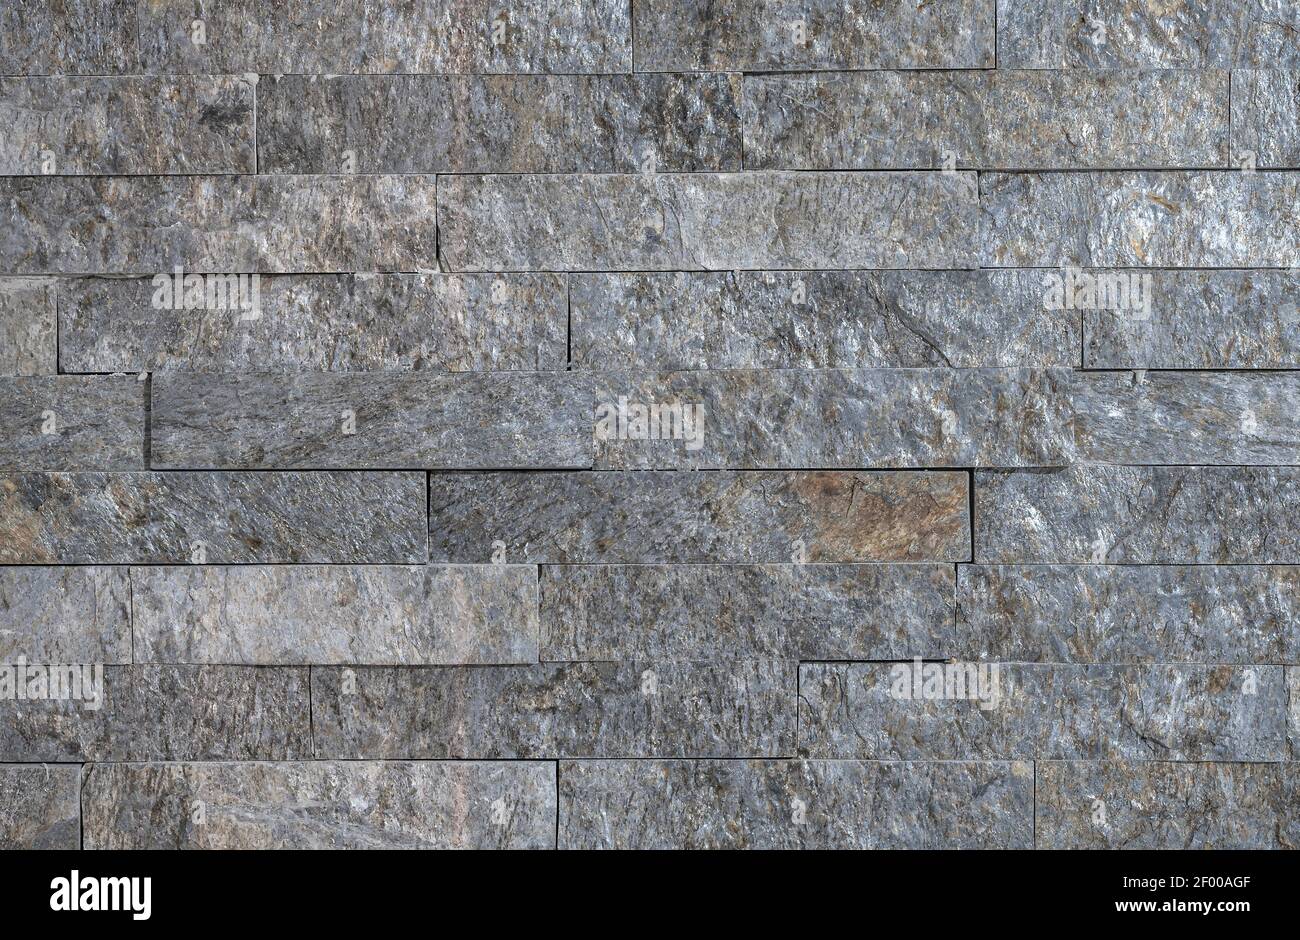 The texture of the natural stone cut in the shape of the tiles on the wall Stock Photo